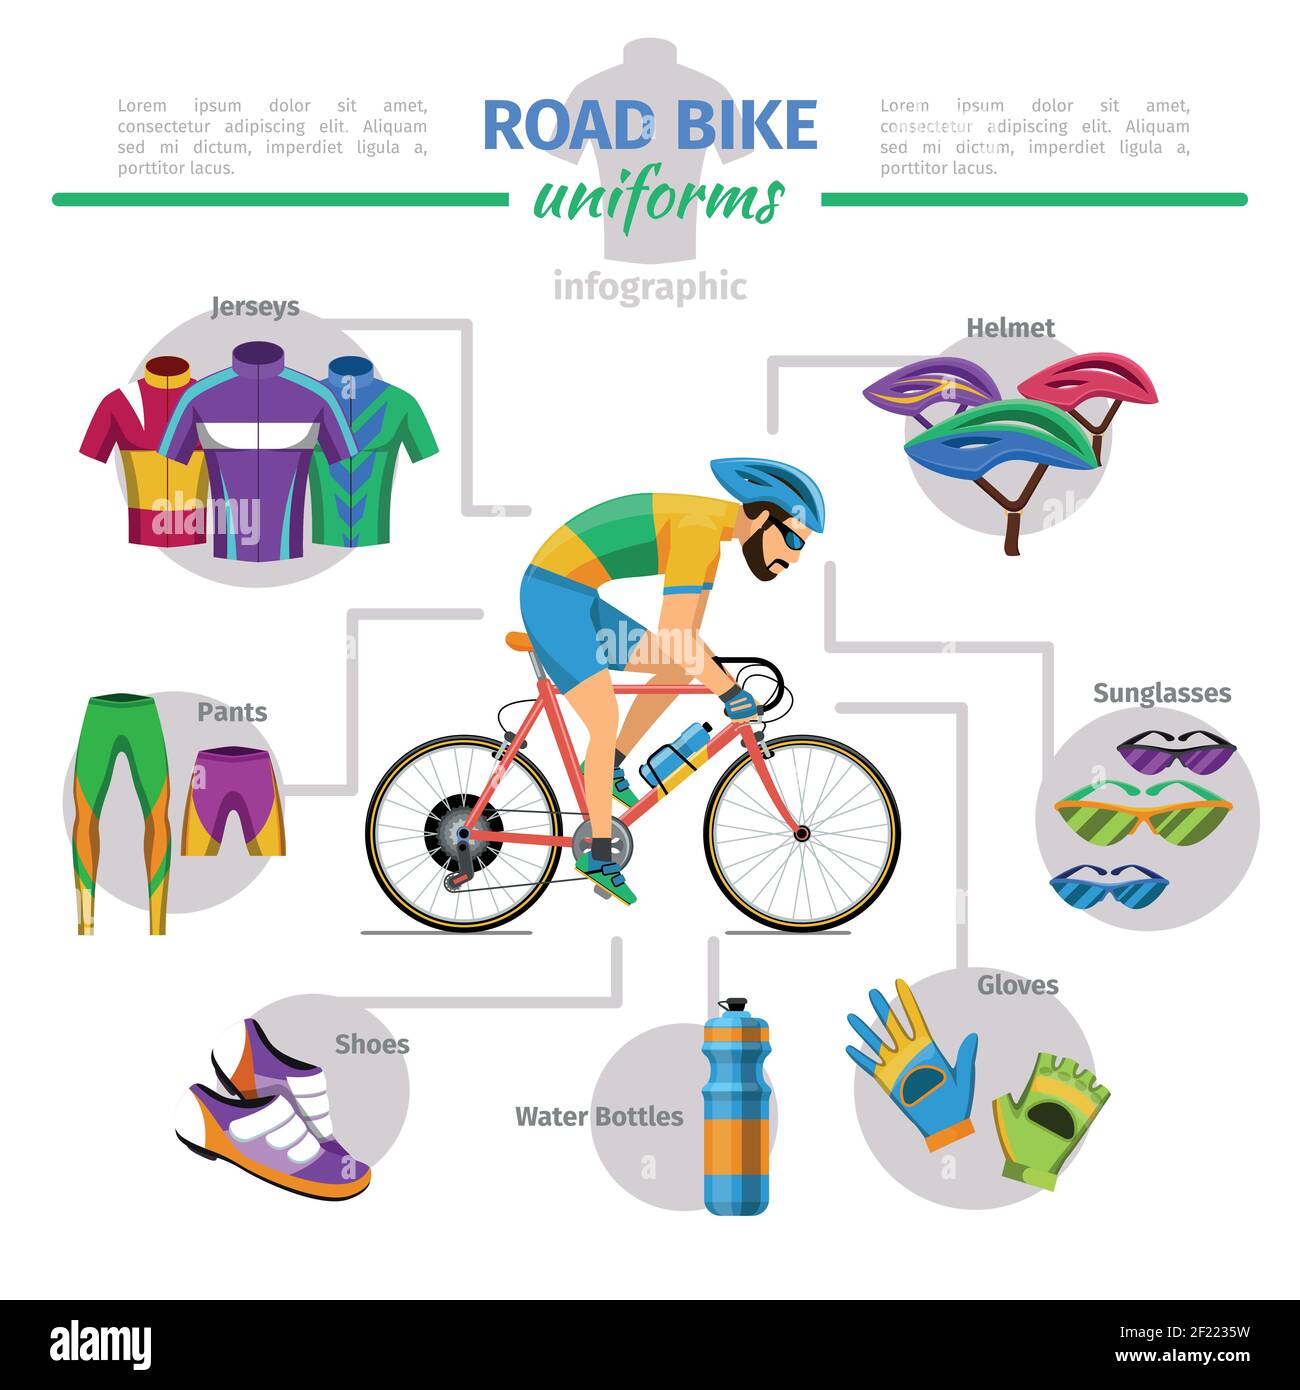 Road bike uniforms vector infographic. Bicycle and glove, jersey and helmet, shoes comfort illustration Stock Vector